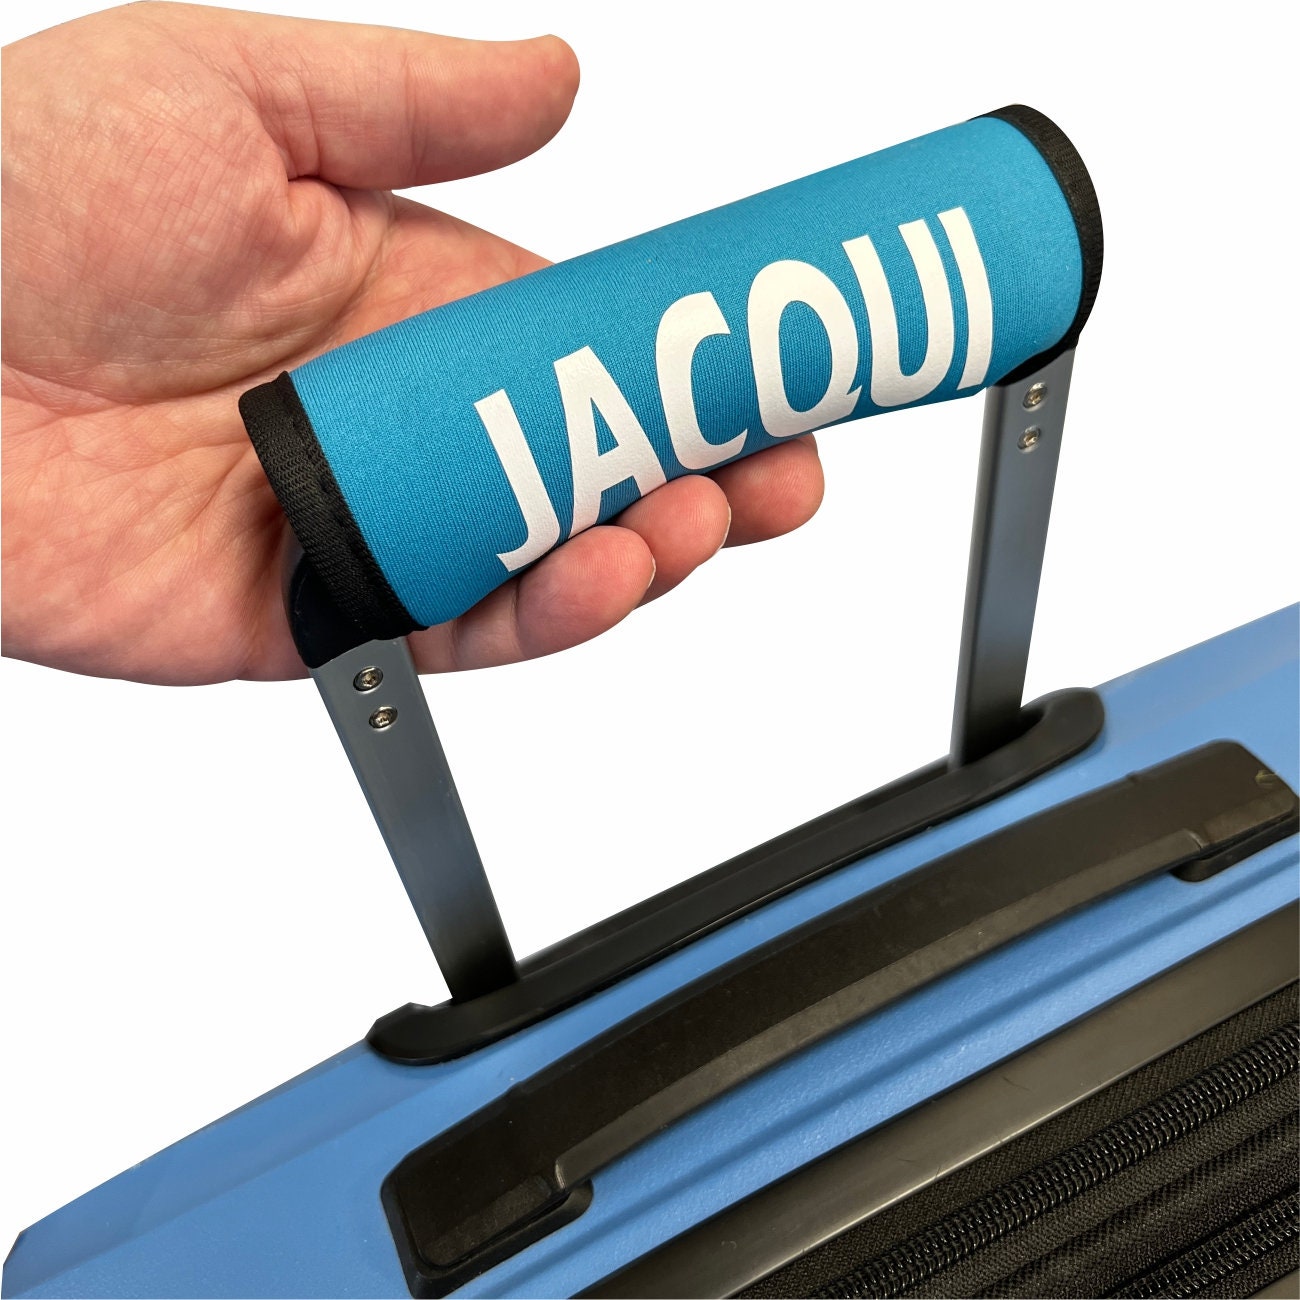 Luggage Tag Handle Wrap for Suitcase Bag, Travel Neoprene Luggage Straps,  Identifier Marker Velcro Handle Cover Accessories Set - Yahoo Shopping